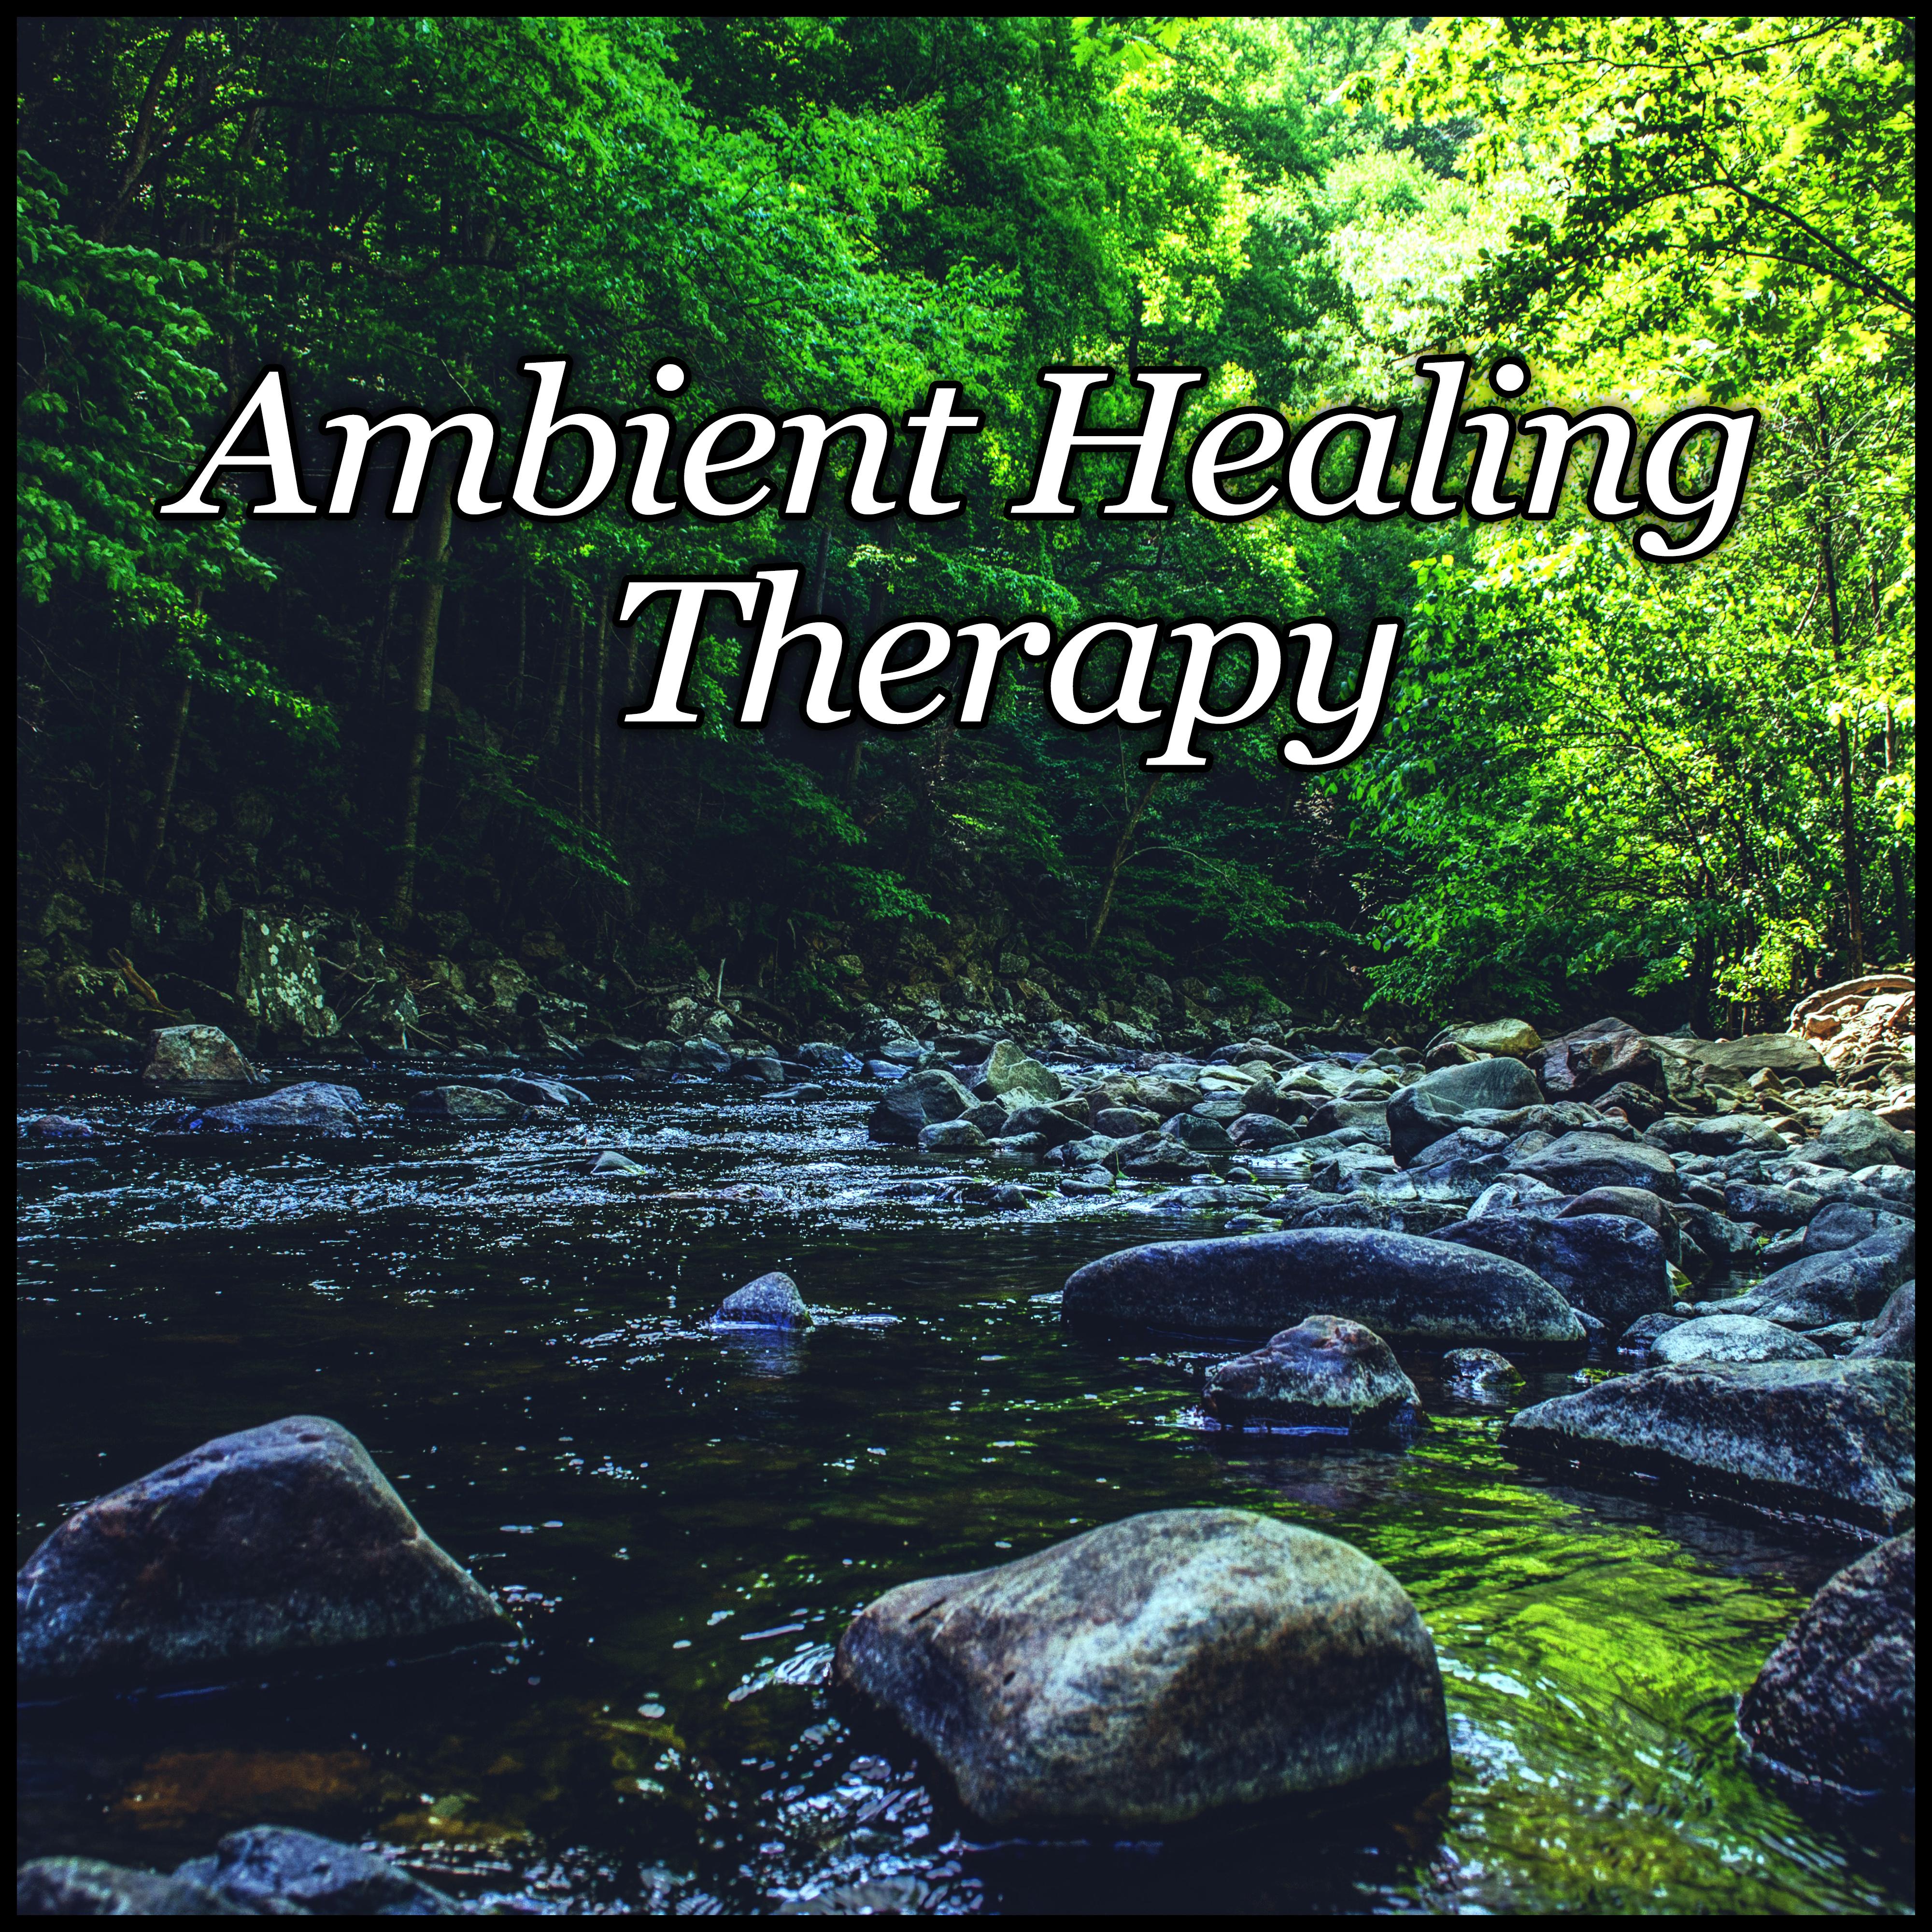 Ambient Healing Therapy  Pure Relaxation, Zen Serenity, Meditation Music, Tranquility Spa, Deep Relaxation, Calming Water, Spa Music